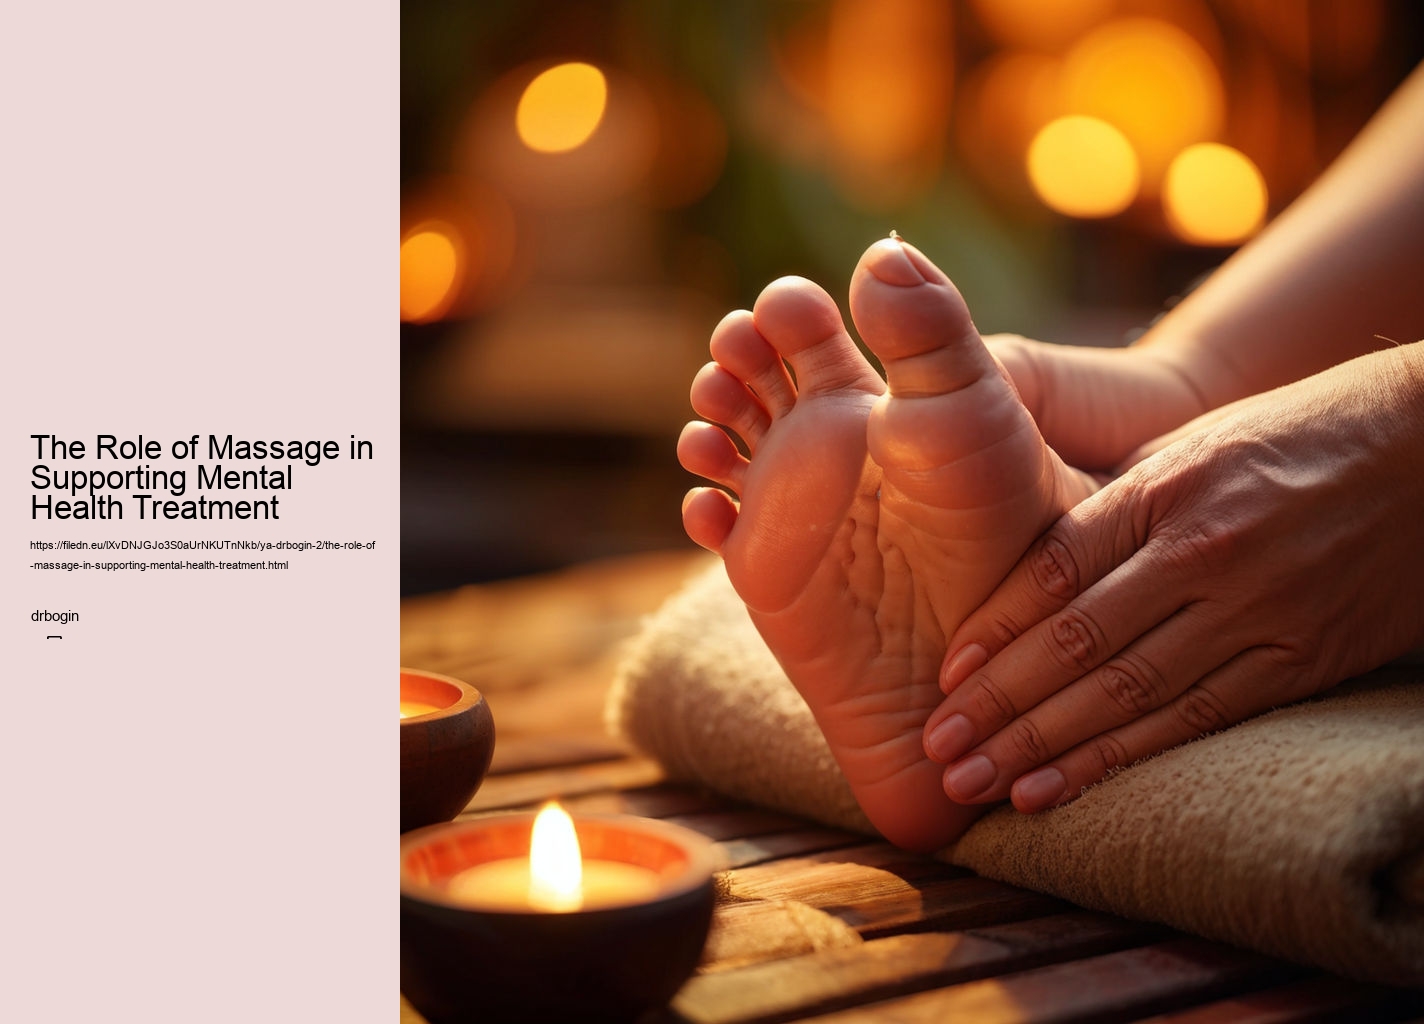 The Role of Massage in Supporting Mental Health Treatment